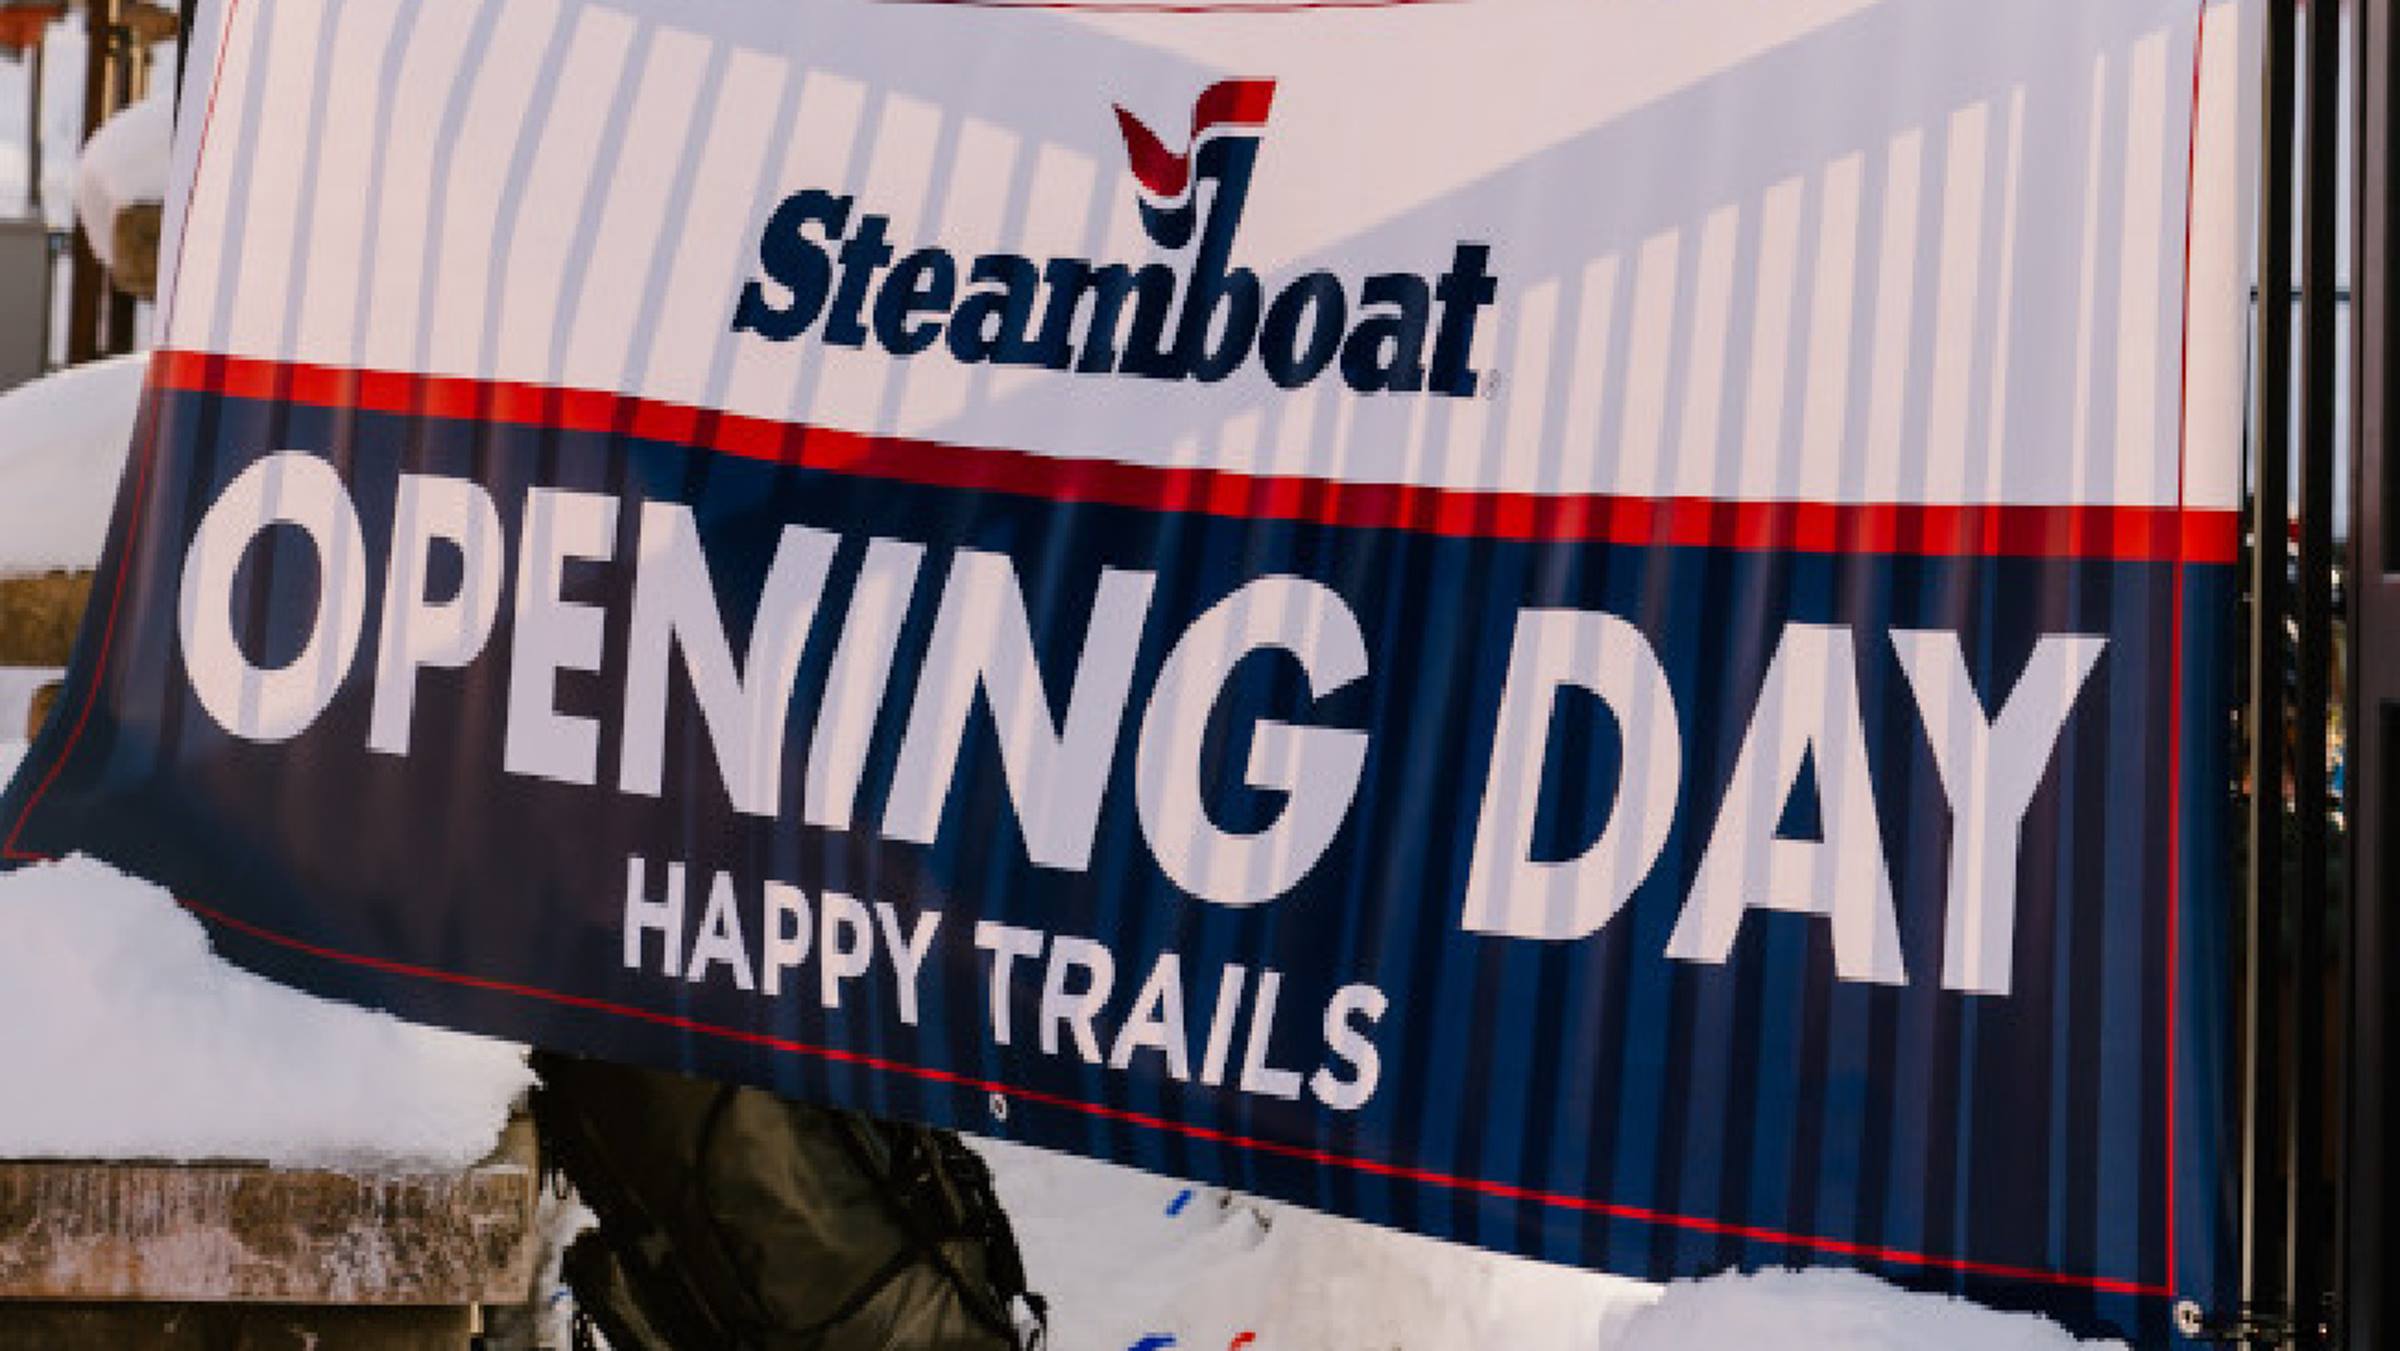 A banner that says 'Steamboat Opening Day Happy Trails'